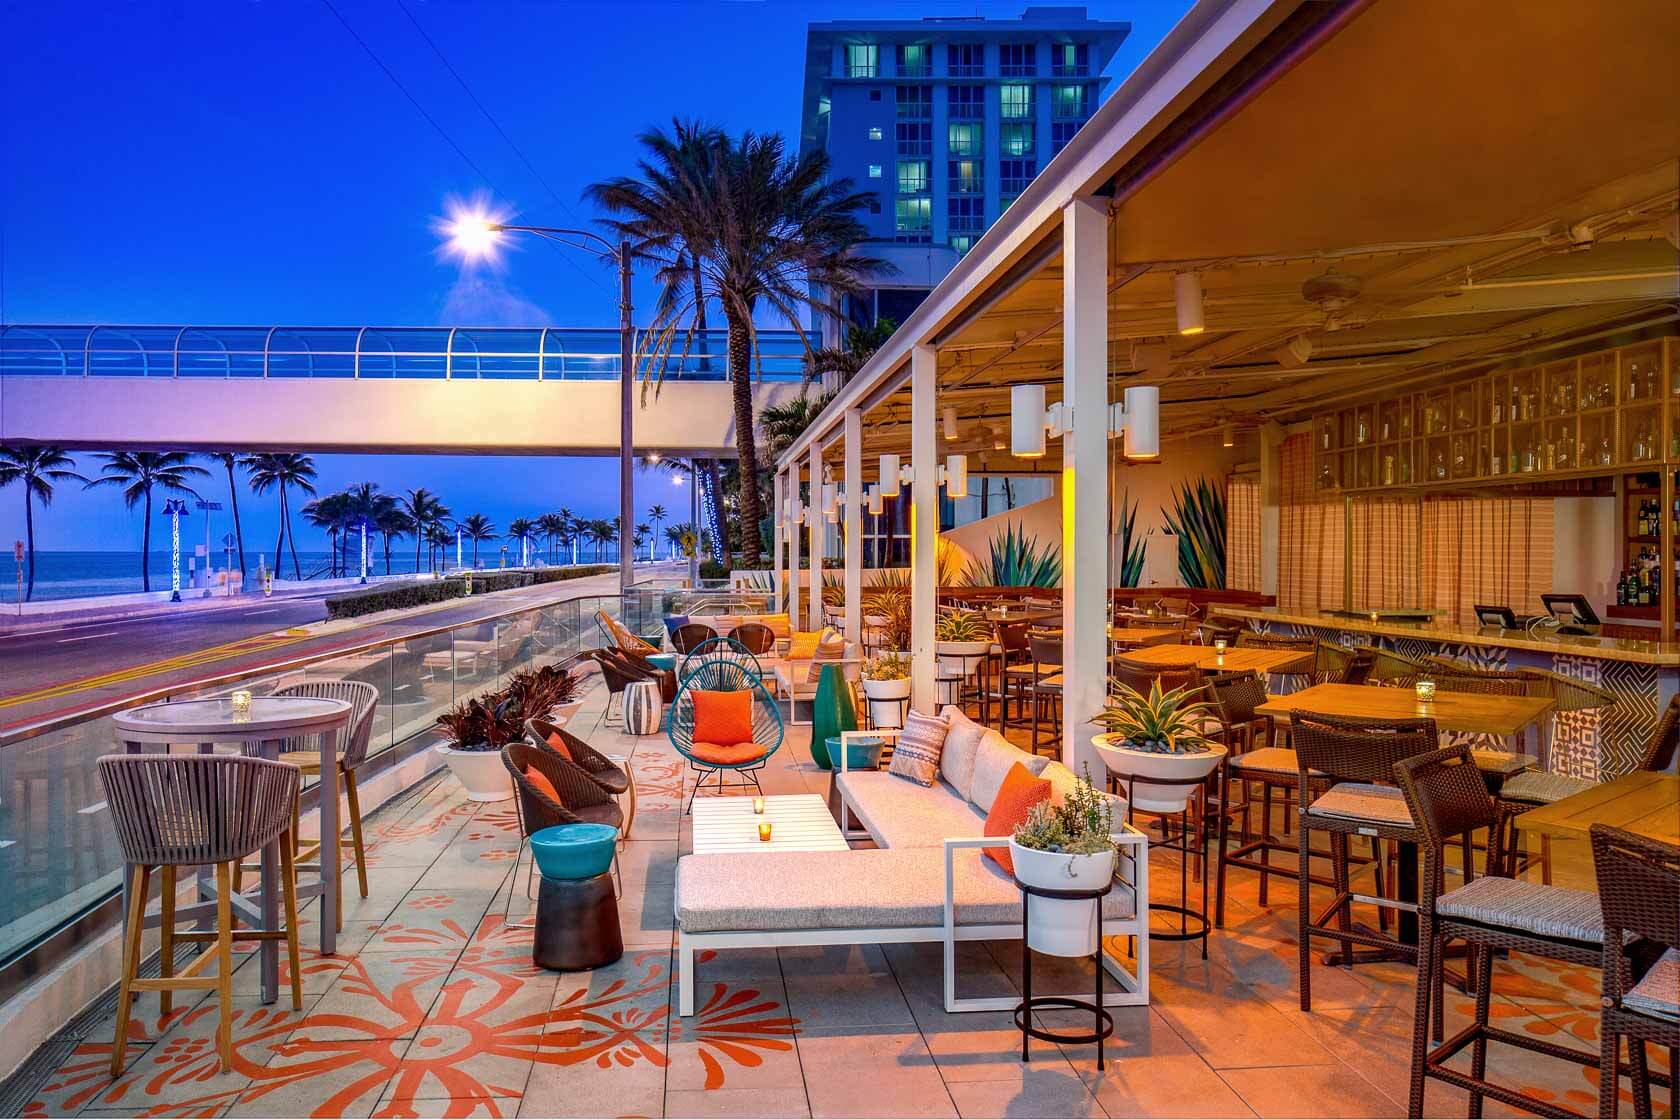 waterfront-dining-in-fort-lauderdale-lunch-menus-lona-cocina